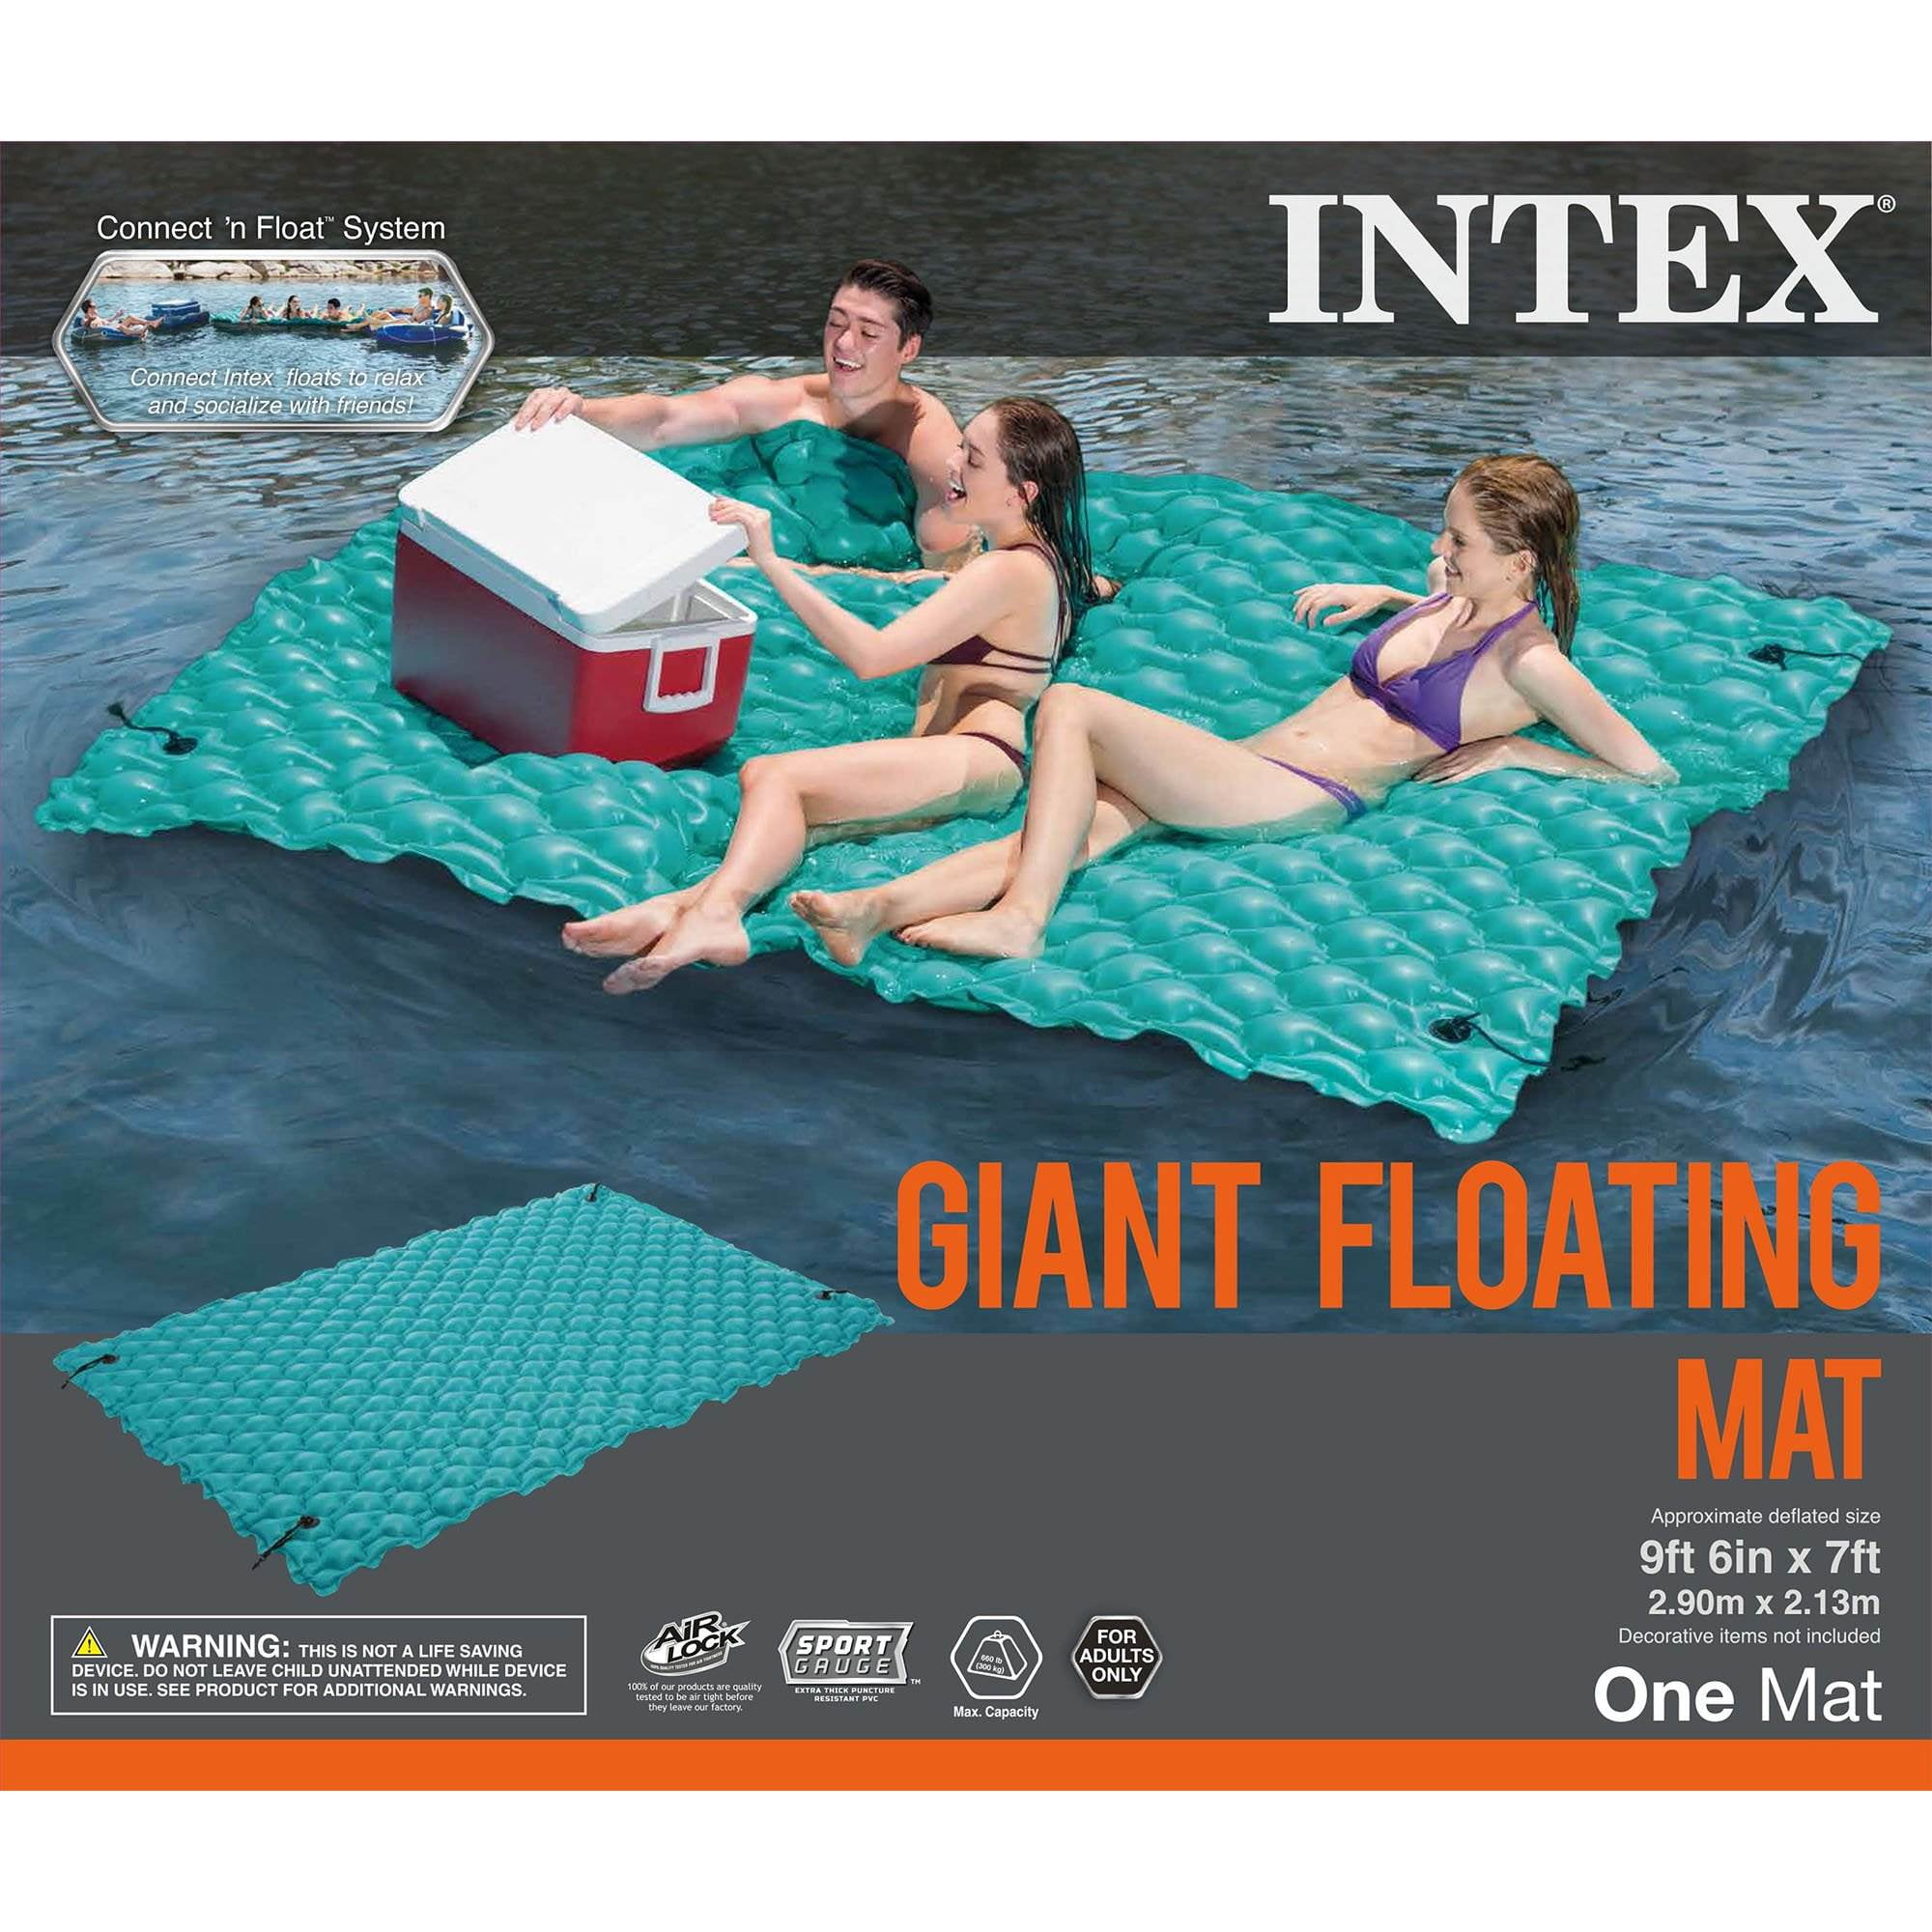 Great for swimming pools Intex Inflatable Giant Floating Raft Mat for 3 People 